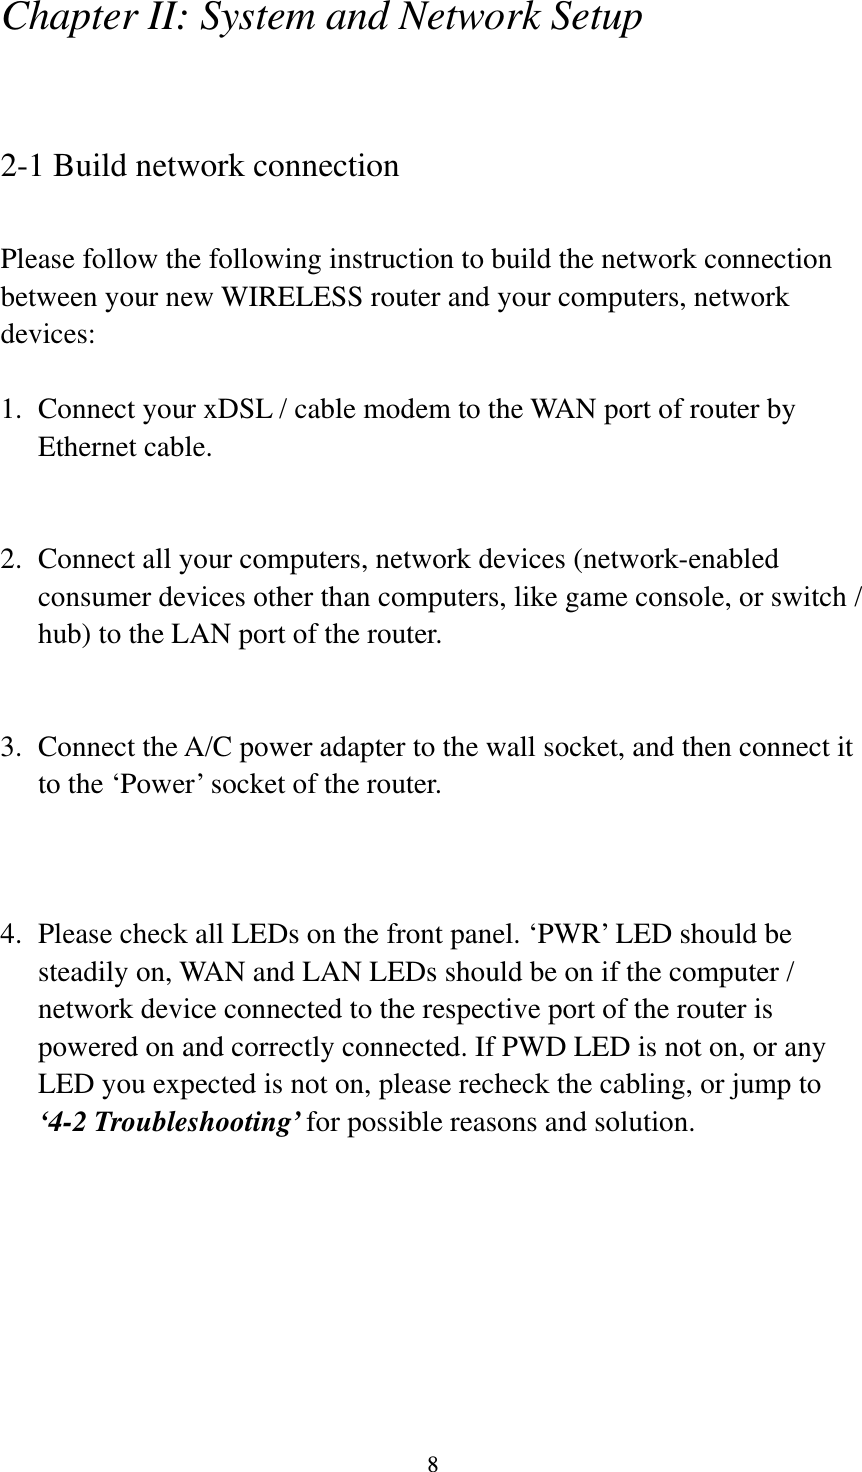 8 Chapter II: System and Network Setup  2-1 Build network connection  Please follow the following instruction to build the network connection between your new WIRELESS router and your computers, network devices:  1. Connect your xDSL / cable modem to the WAN port of router by Ethernet cable.     2. Connect all your computers, network devices (network-enabled consumer devices other than computers, like game console, or switch / hub) to the LAN port of the router.   3. Connect the A/C power adapter to the wall socket, and then connect it to the ‘Power’ socket of the router.    4. Please check all LEDs on the front panel. ‘PWR’ LED should be steadily on, WAN and LAN LEDs should be on if the computer / network device connected to the respective port of the router is powered on and correctly connected. If PWD LED is not on, or any LED you expected is not on, please recheck the cabling, or jump to ‘4-2 Troubleshooting’ for possible reasons and solution. 